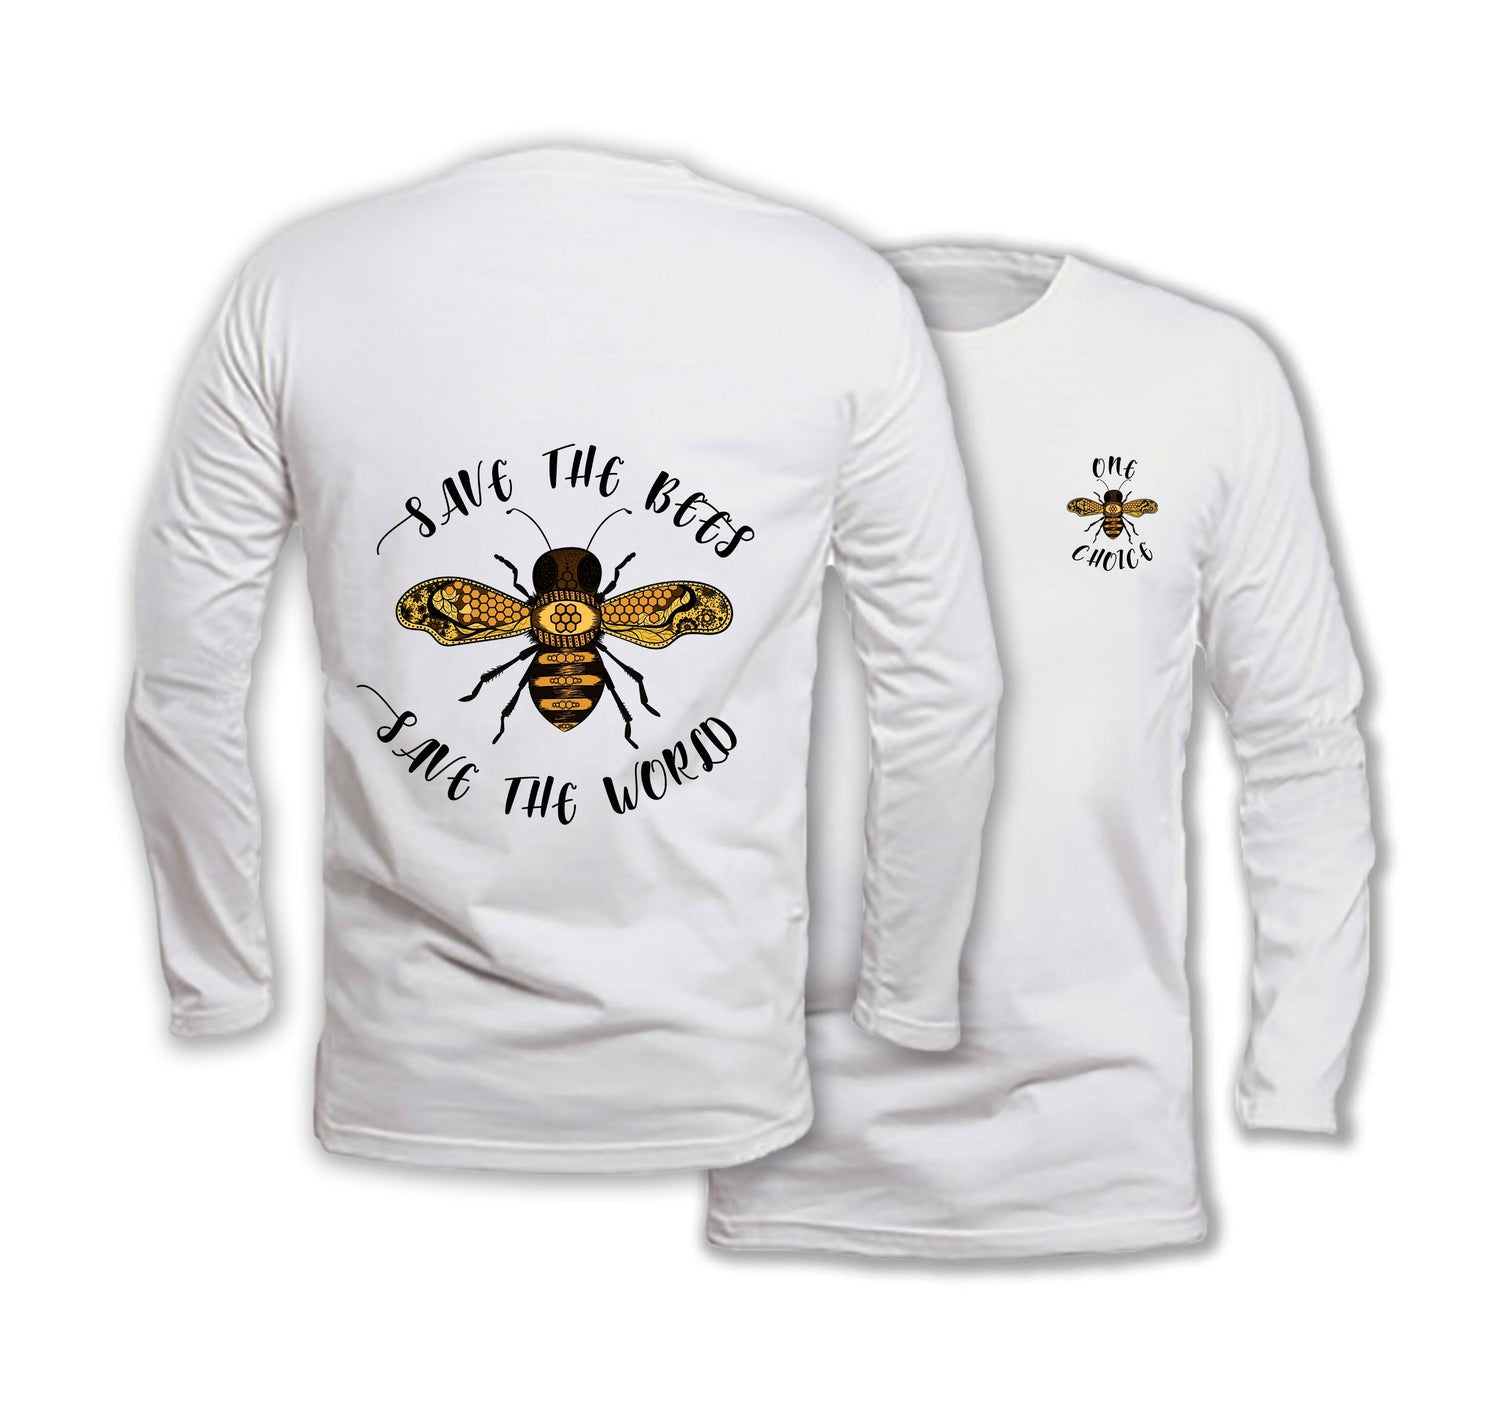 Save The Bees - Long Sleeve Organic Cotton T-Shirt - One Choice Apparel